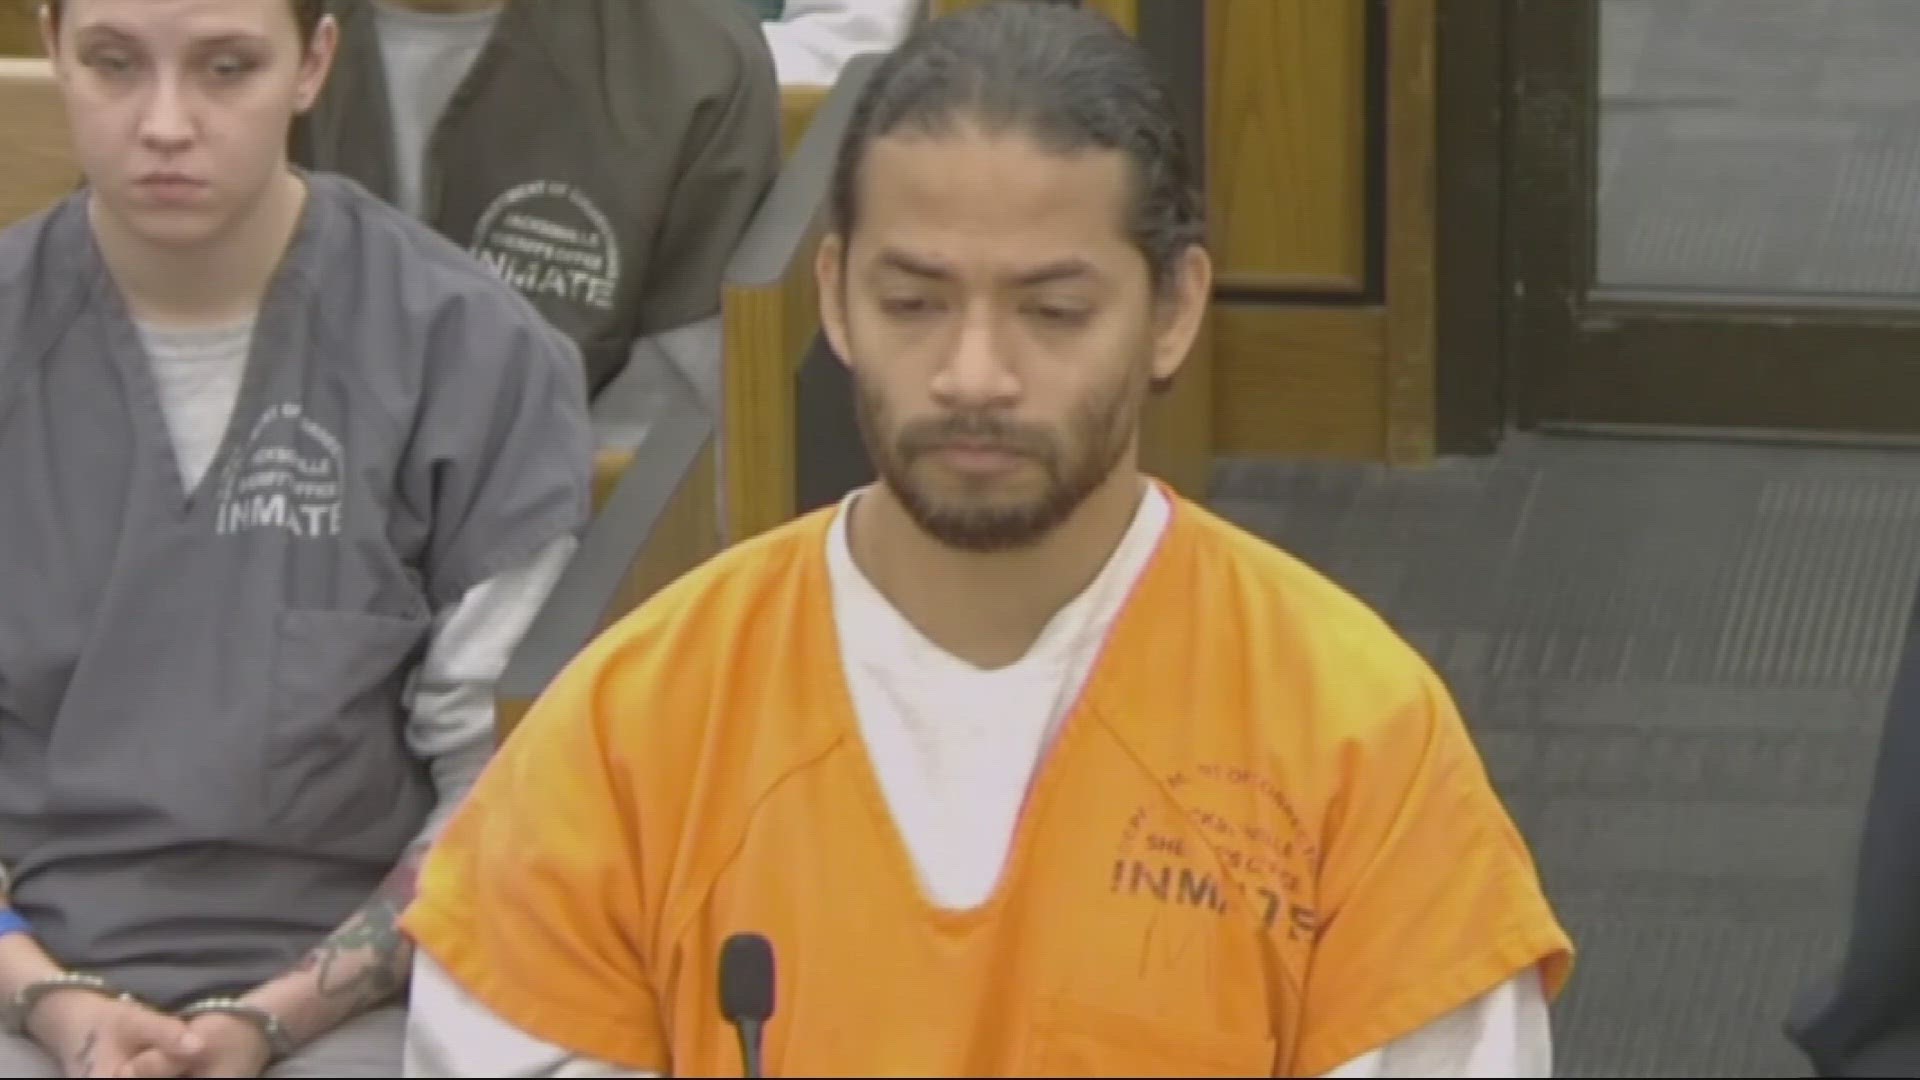 Fernandez Saldana's next court date is scheduled for April 4. He is being held without bond.